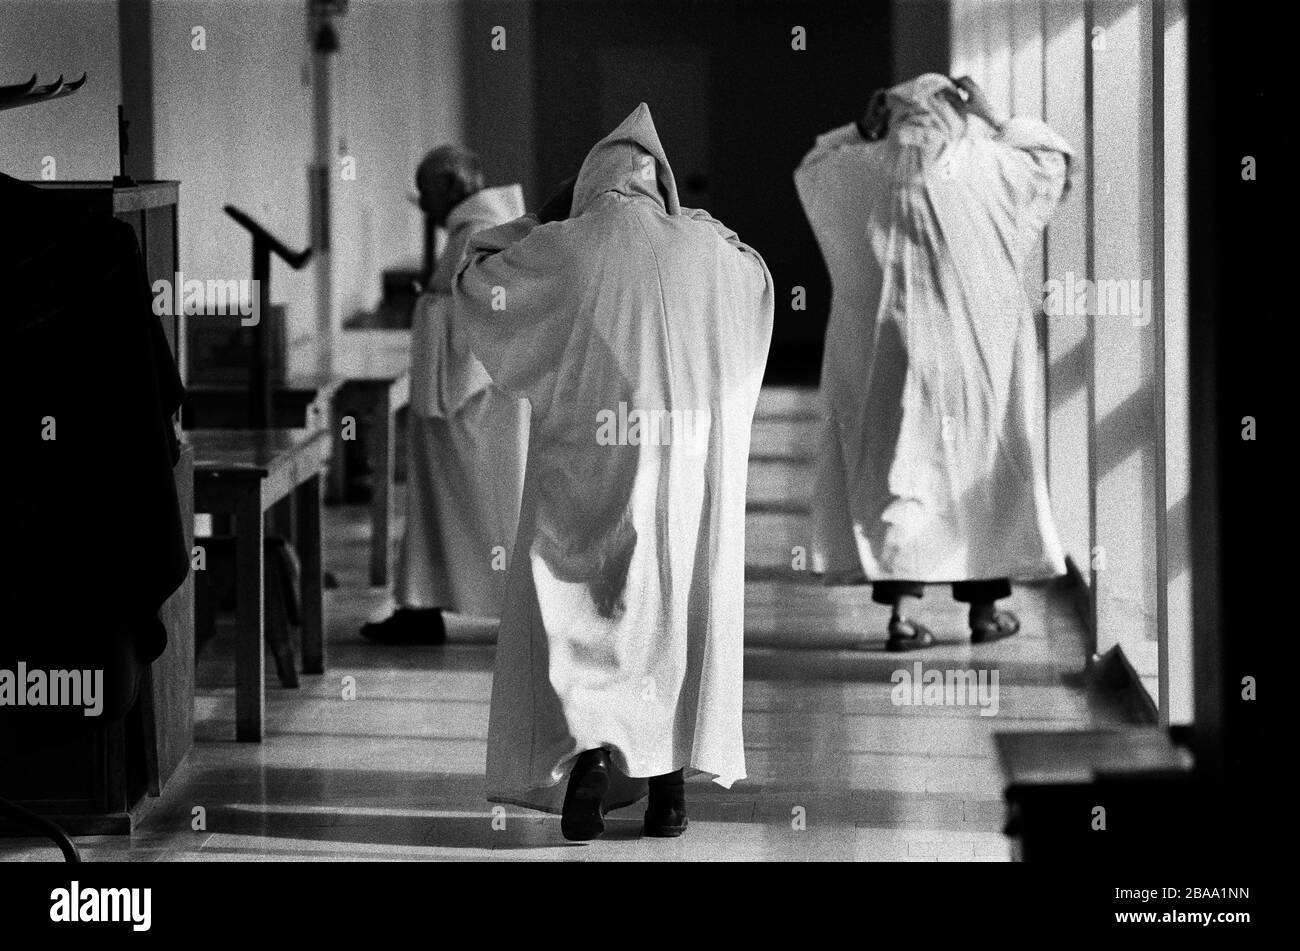 Monks make their way to the prayer chapel at Sancta Maria Abbey at Nunraw, East Lothian, home since 1946 to the Order of Cistercians of the Strict Observance. Around 15 monks were resident at Nunraw in 1996, undertaking a mixture of daily tasks and strict religious observance. The present purpose-built building dates from 1969 when the monks moved from the nearby Nunraw house. Stock Photo